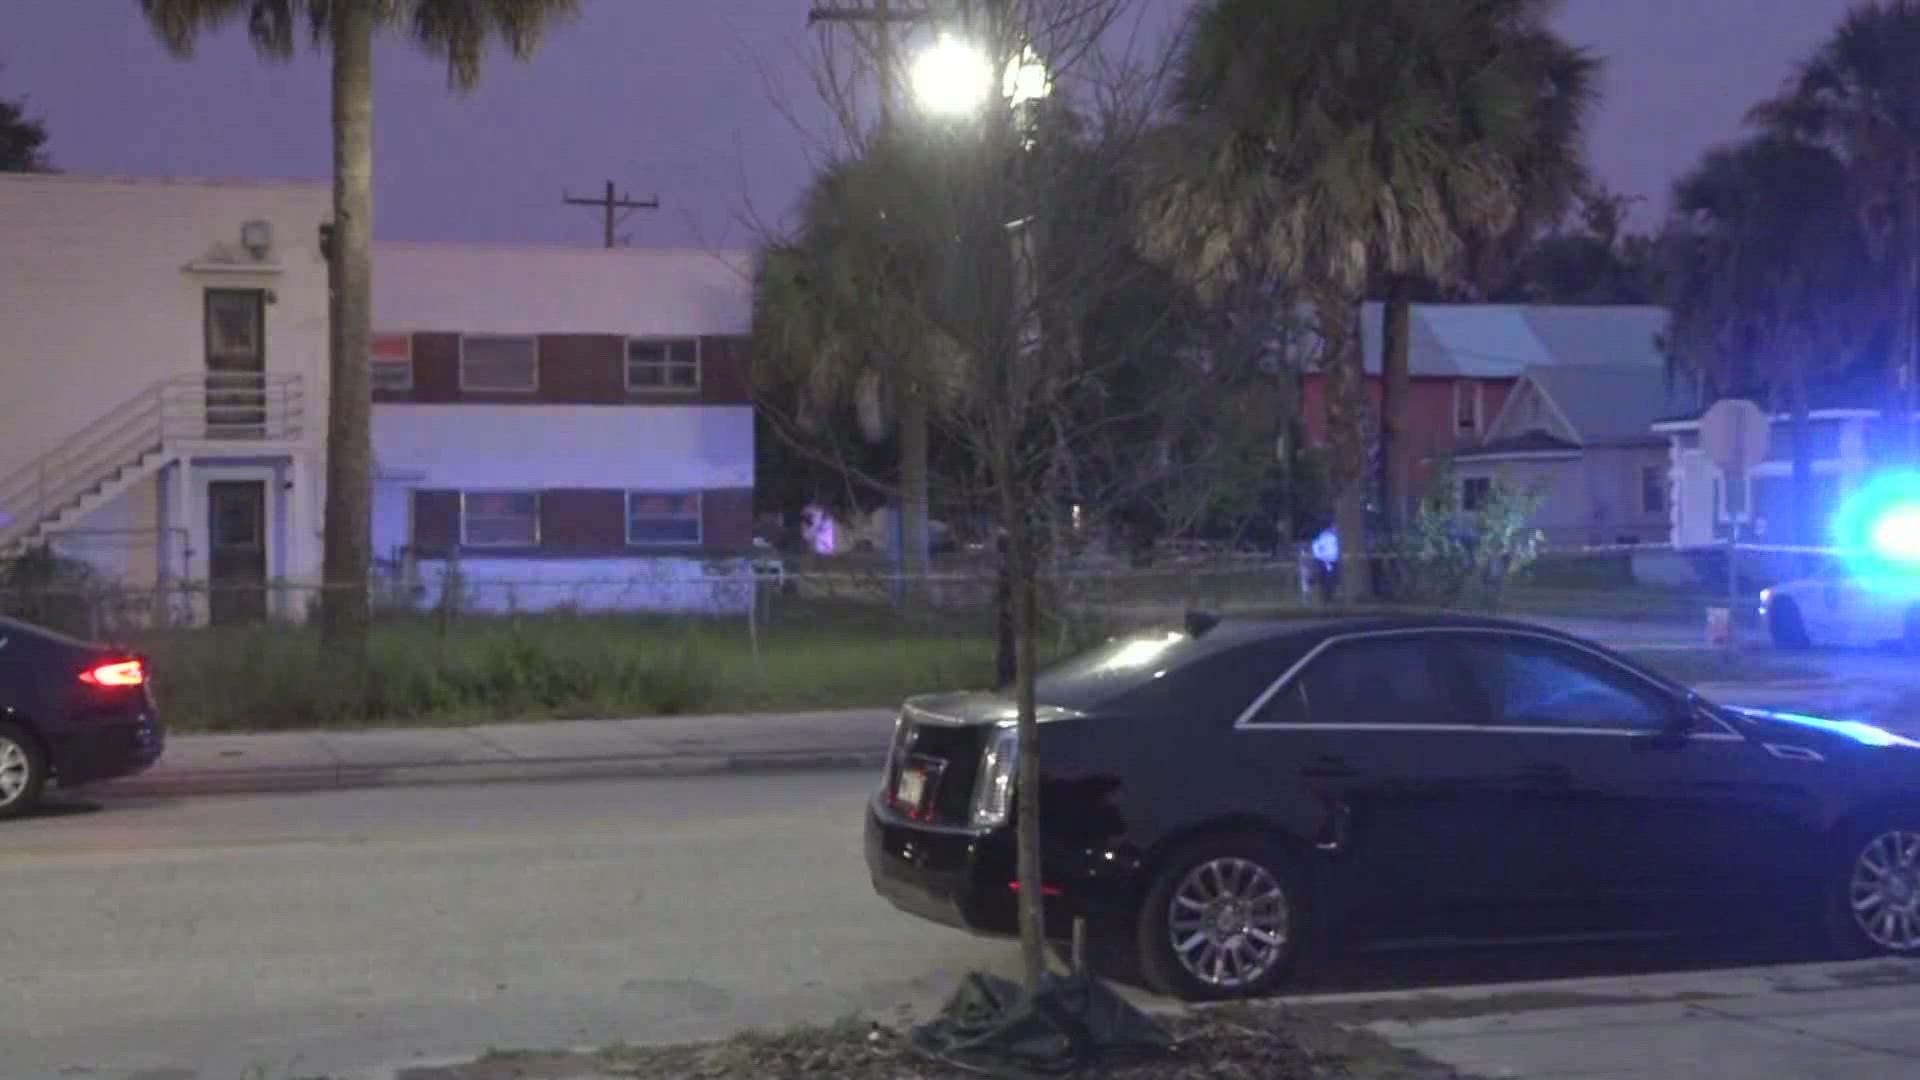 Four people have been shot in Jacksonville Tuesday night. Three are in stable condition and one is in critical.